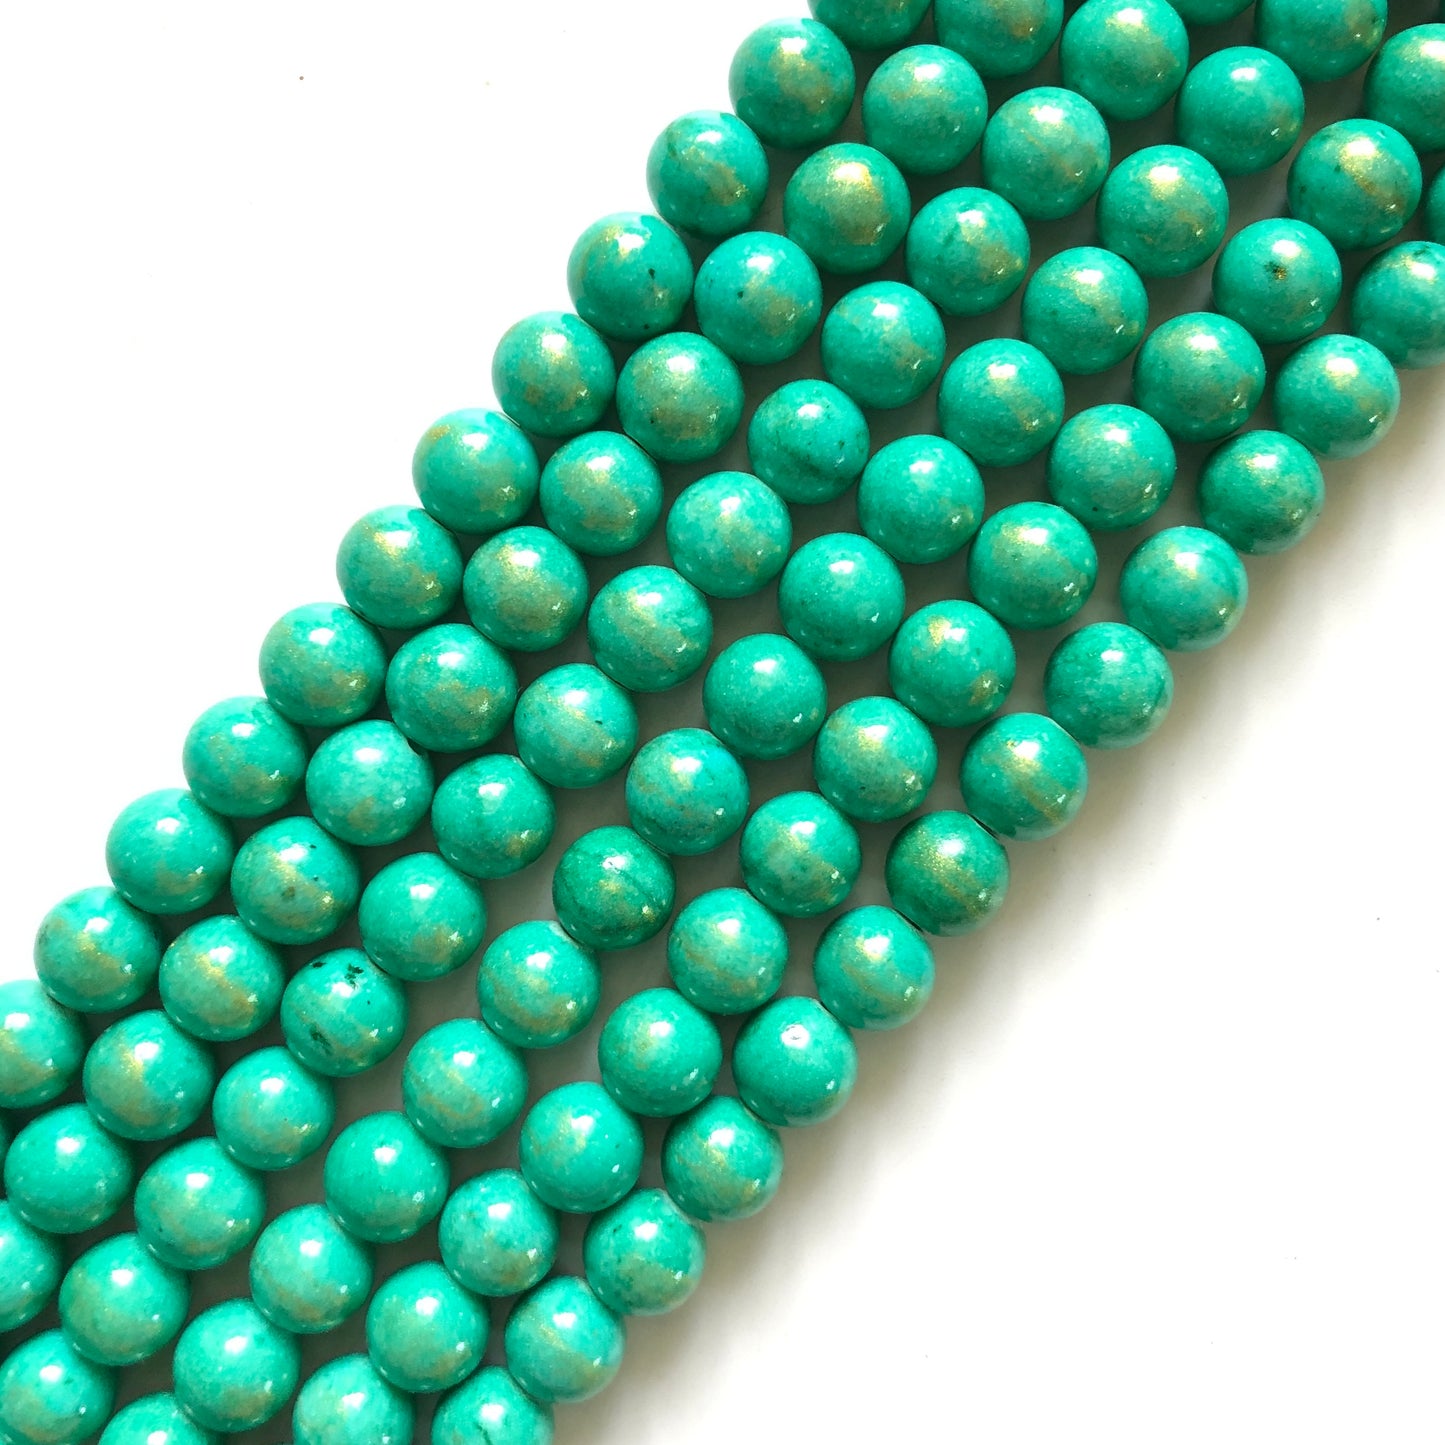 2 Strands/lot 8mm, 10mm Bright Turquoise Gold Plated Jade Round Stone Beads Stone Beads 8mm Stone Beads Gold Plated Jade Beads Round Jade Beads Charms Beads Beyond